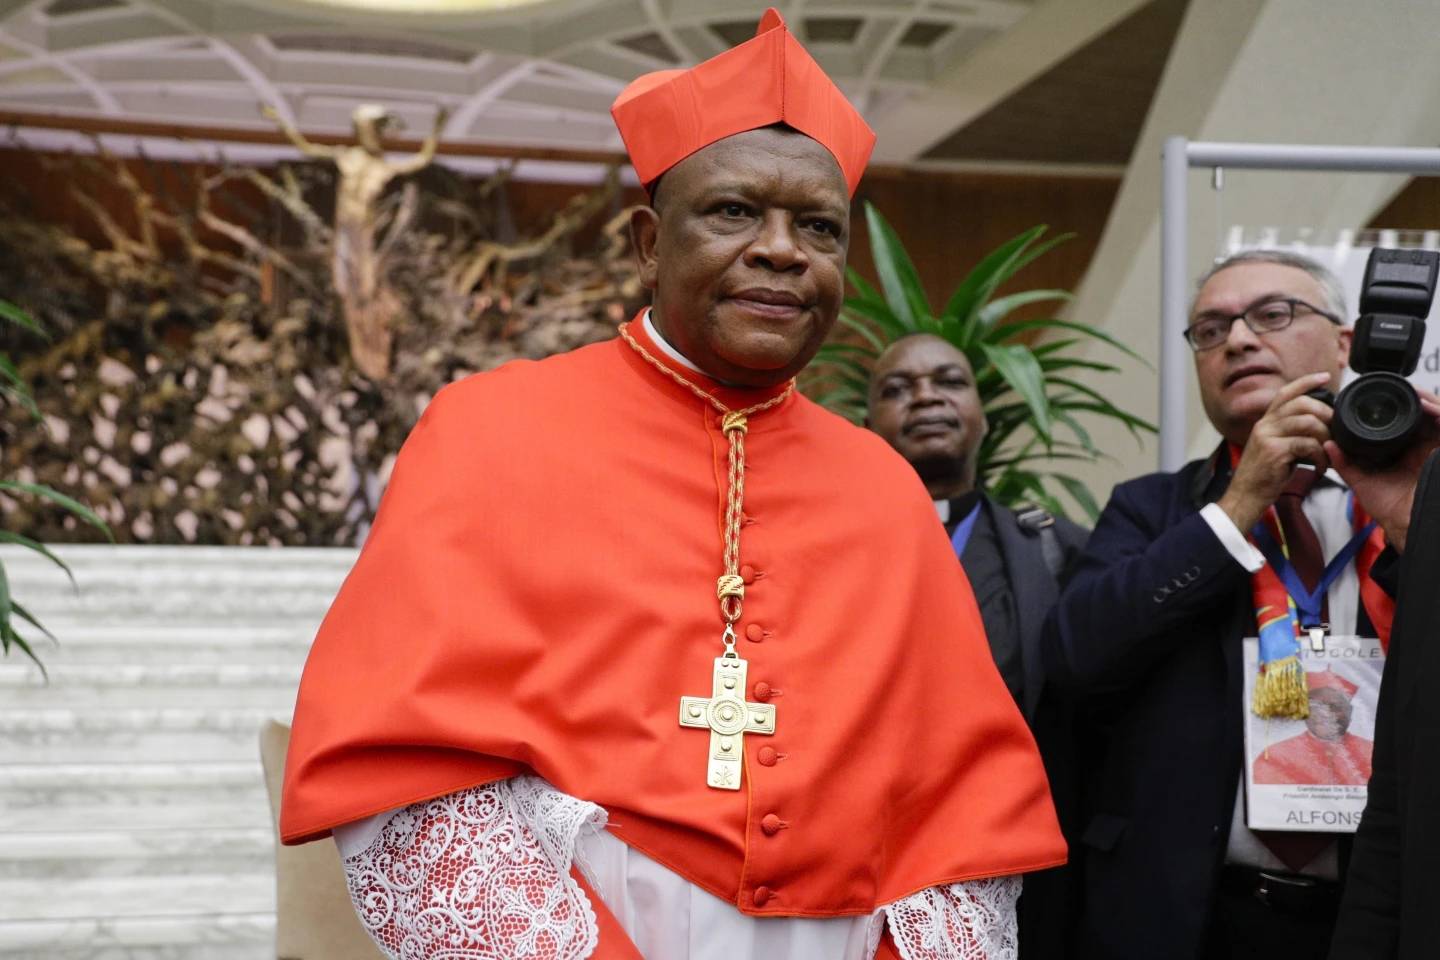 Cardinal Fridolin Among Besungu leaves after receiving the red three-cornered biretta hat from Pope Francis during a consistory inside St. Peter’s Basilica, at the Vatican, Oct. 5, 2019. (Credit: Andrew Medichini/AP.)